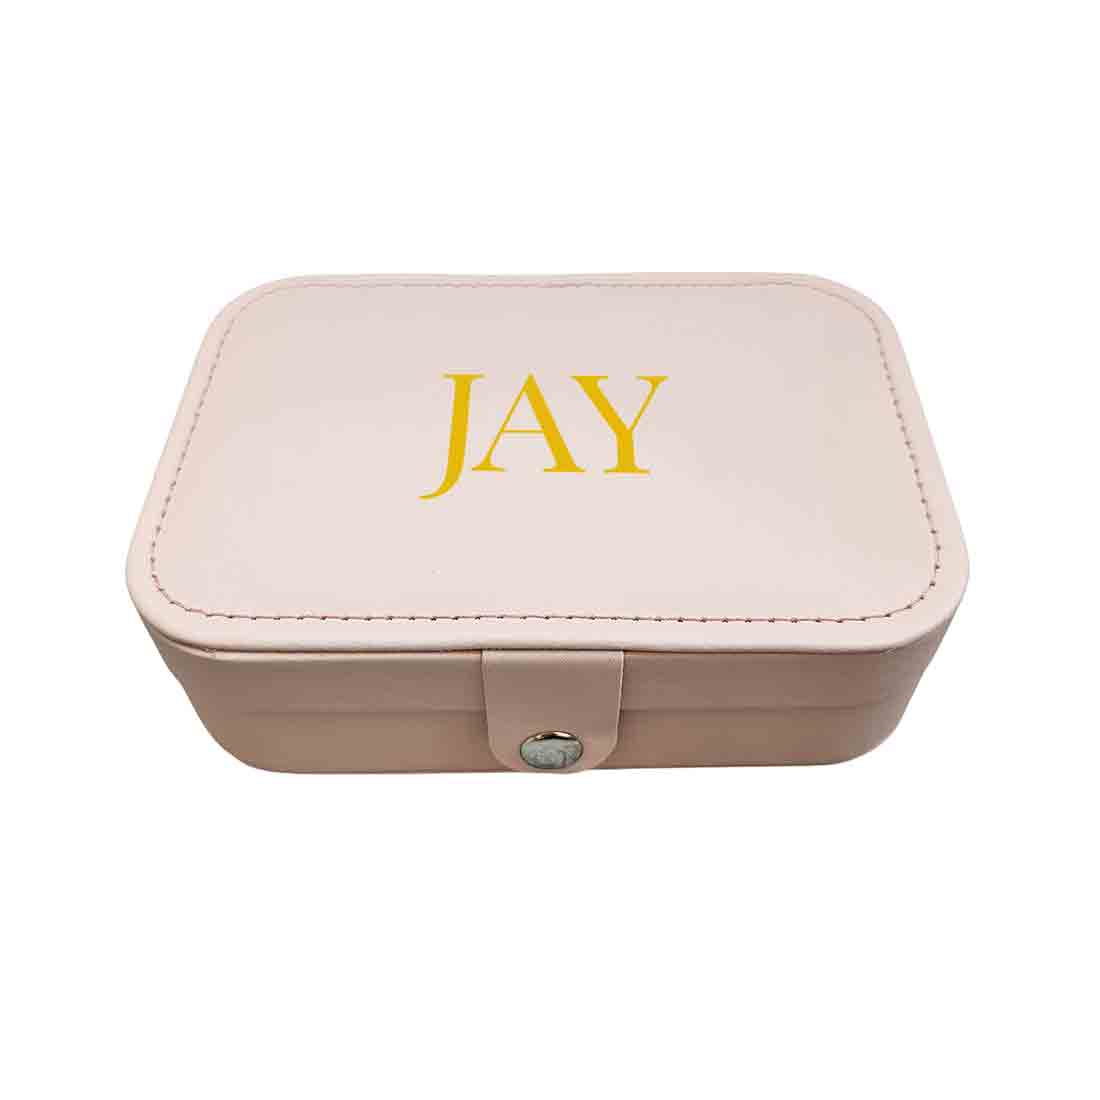 Personalized jewelry Box Organizer for Travel Storage Case for Rings Earrings and Pendants